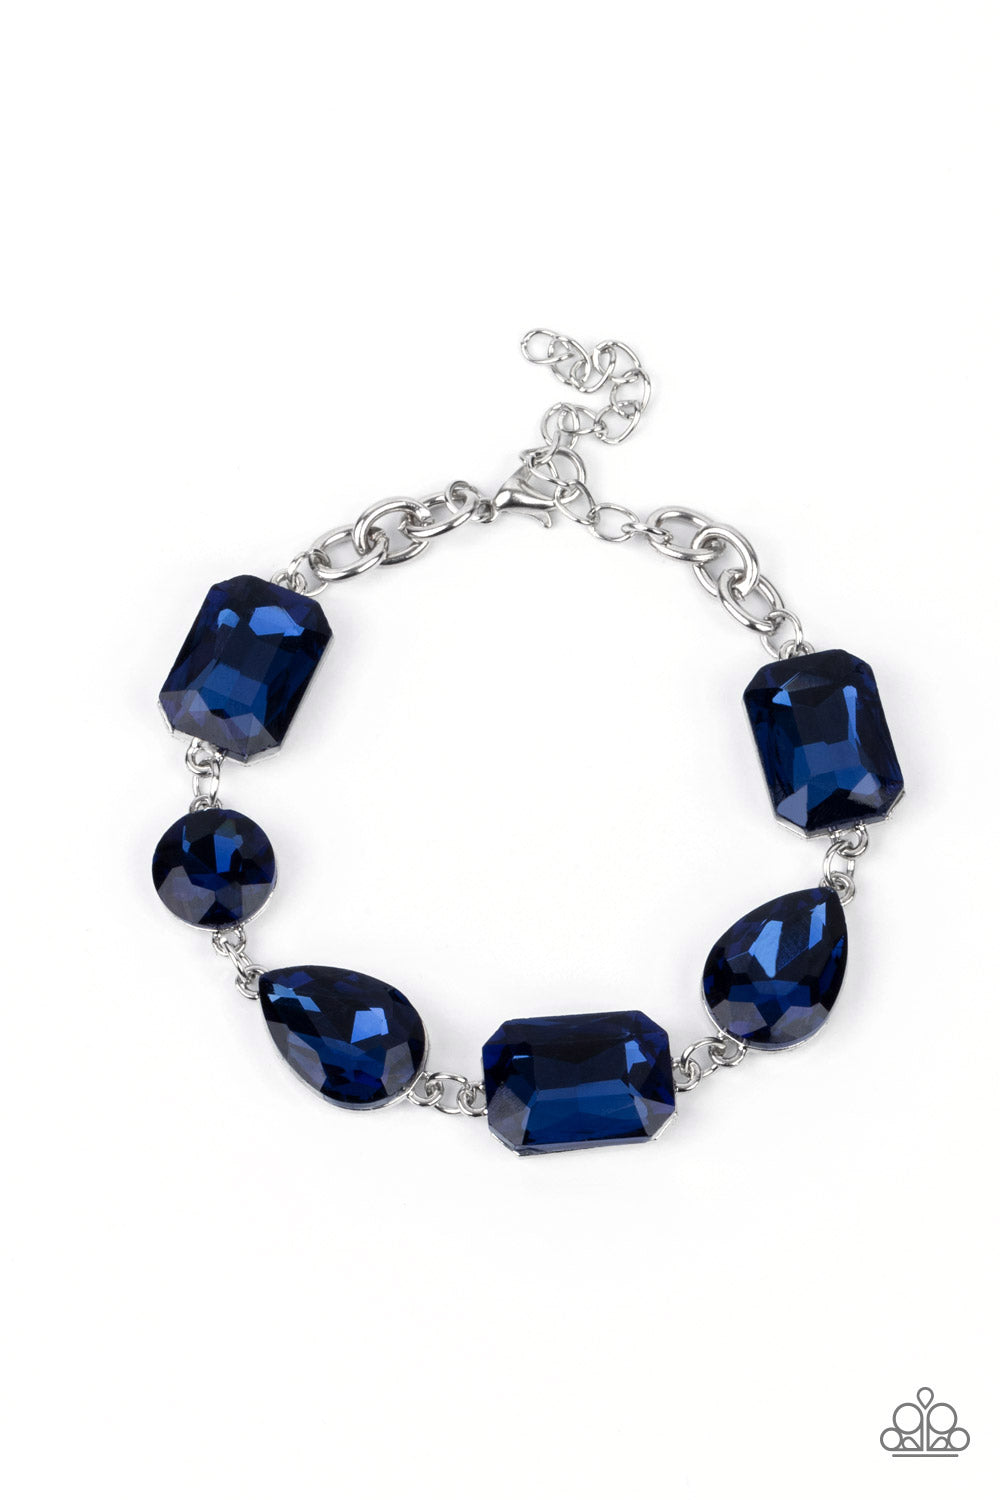 Cosmic Treasure Chest Blue Bracelet - Paparazzi Accessories  A collection of oversized round, teardrop, and emerald cut blue rhinestones delicately link around the wrist, creating a blinding statement piece. Features an adjustable clasp closure.  All Paparazzi Accessories are lead free and nickel free!  Sold as one individual bracelet.